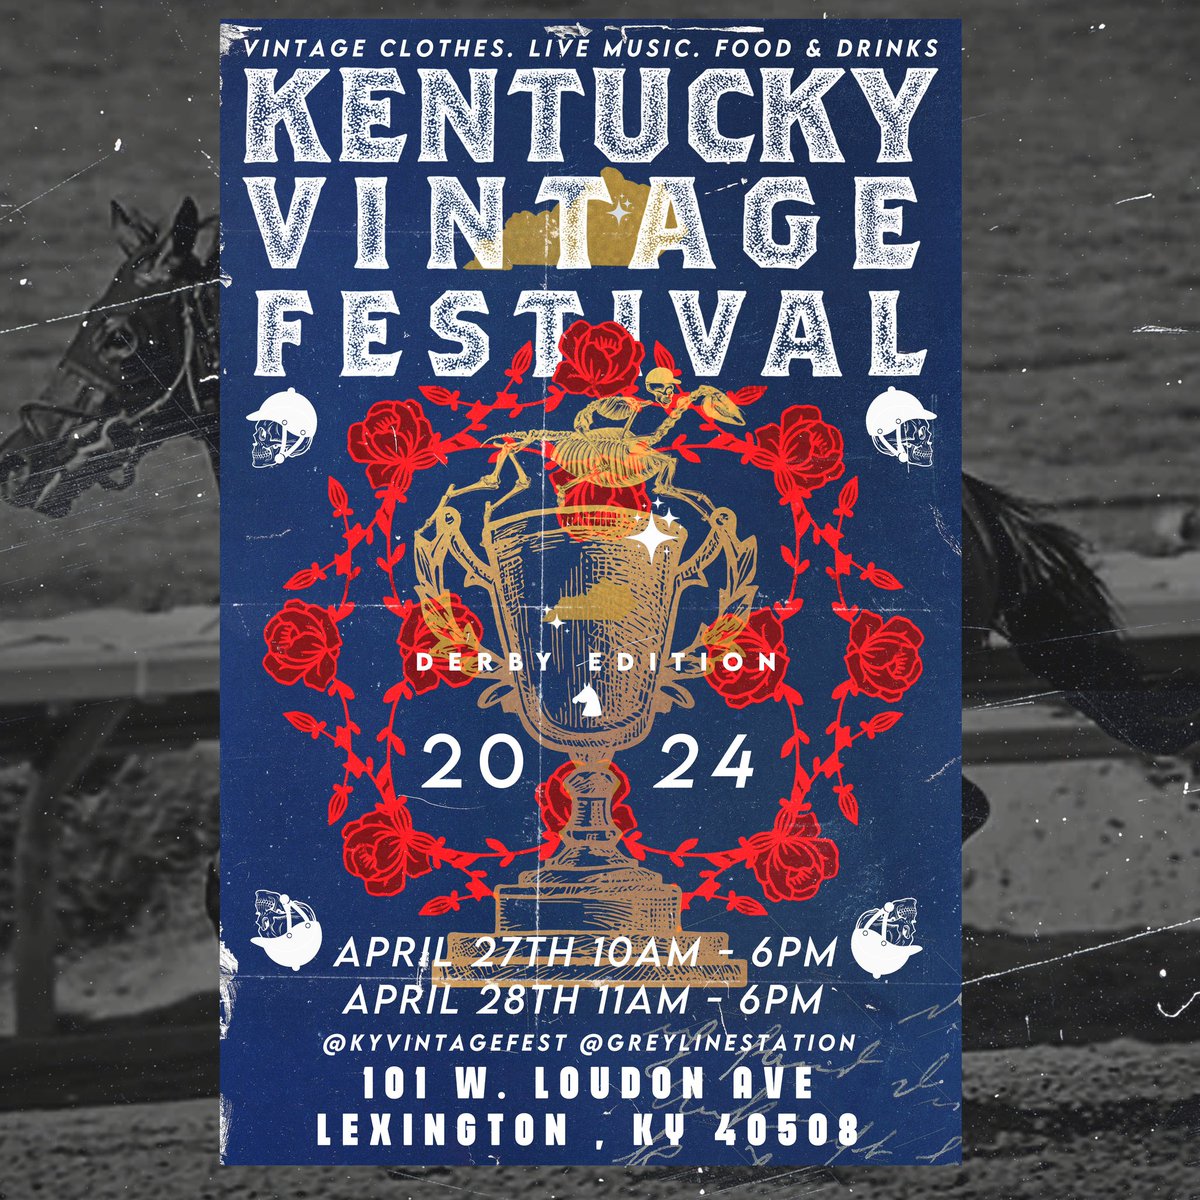 Flyer design for Kentucky Vintage Fest. Loosely inspired my Grateful Dead themes , the derby and spring fashion

Hit up the Greyline Station in Lexington , Ky for the festival April 27 - 28th.

#staychampion
#kentuckyvintagefest
#followthrough
#keepgoing
#infamousjeanclaude